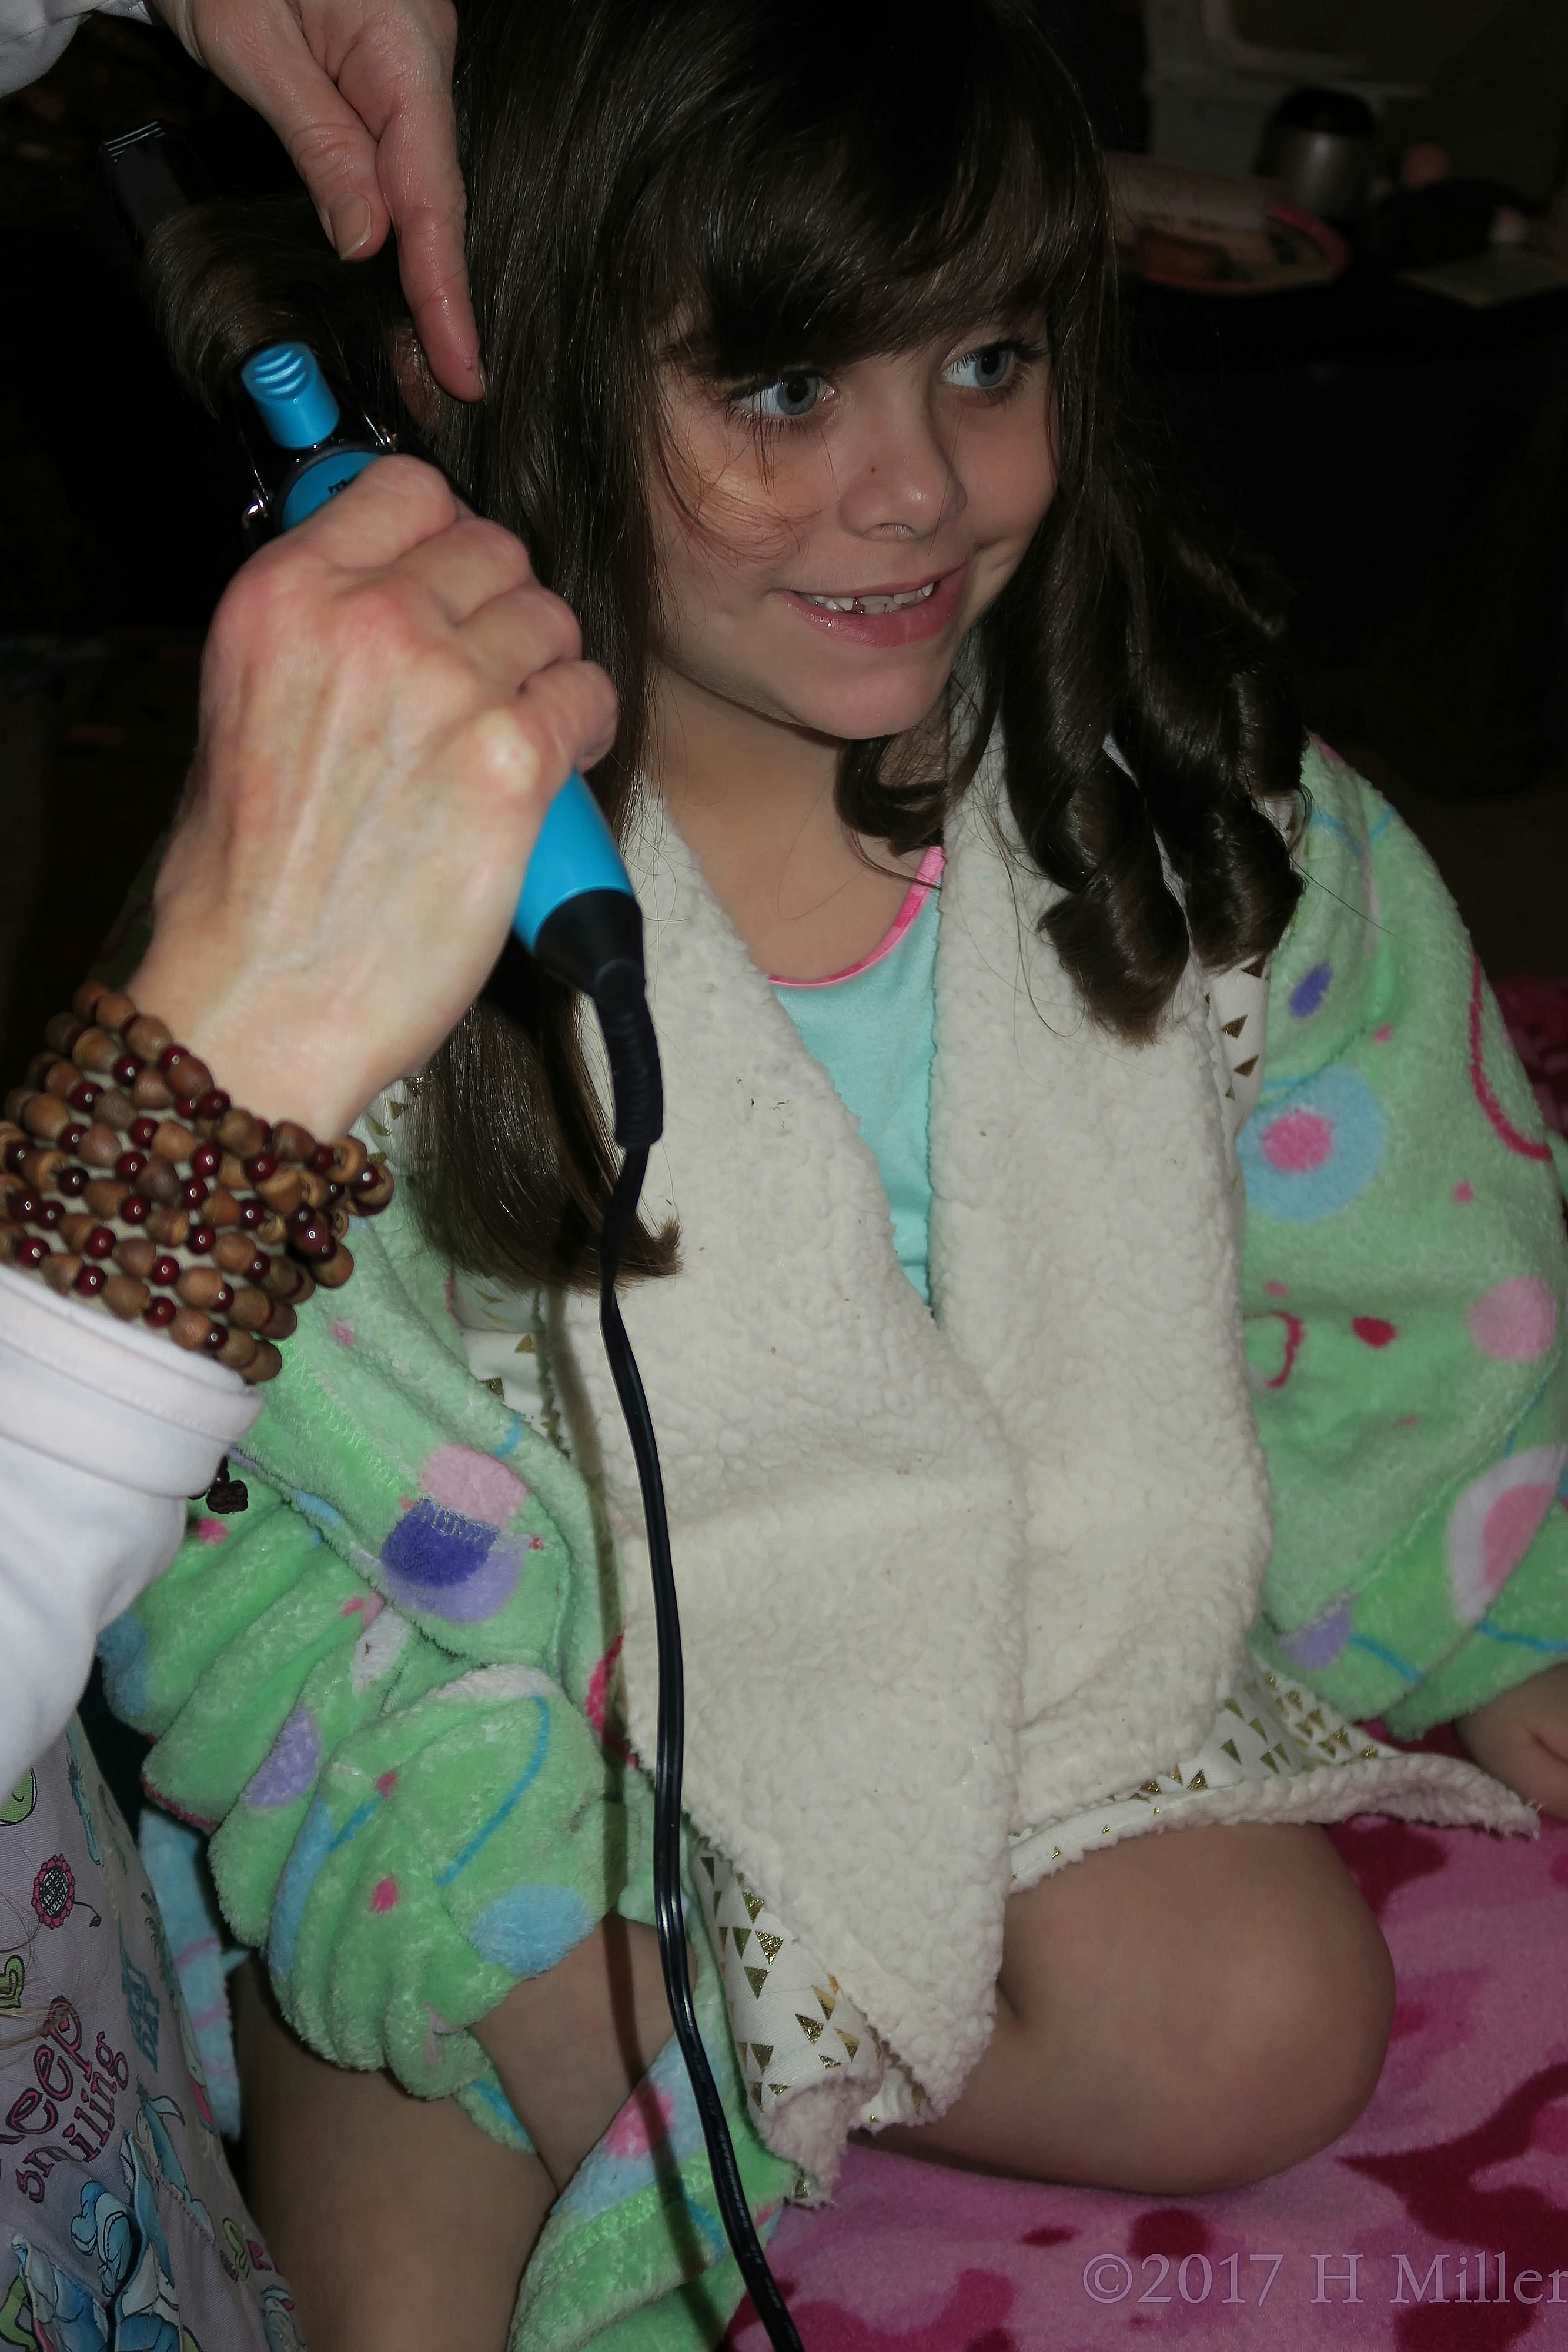 Getting Her Hair Curled At The Spa For Girls. 